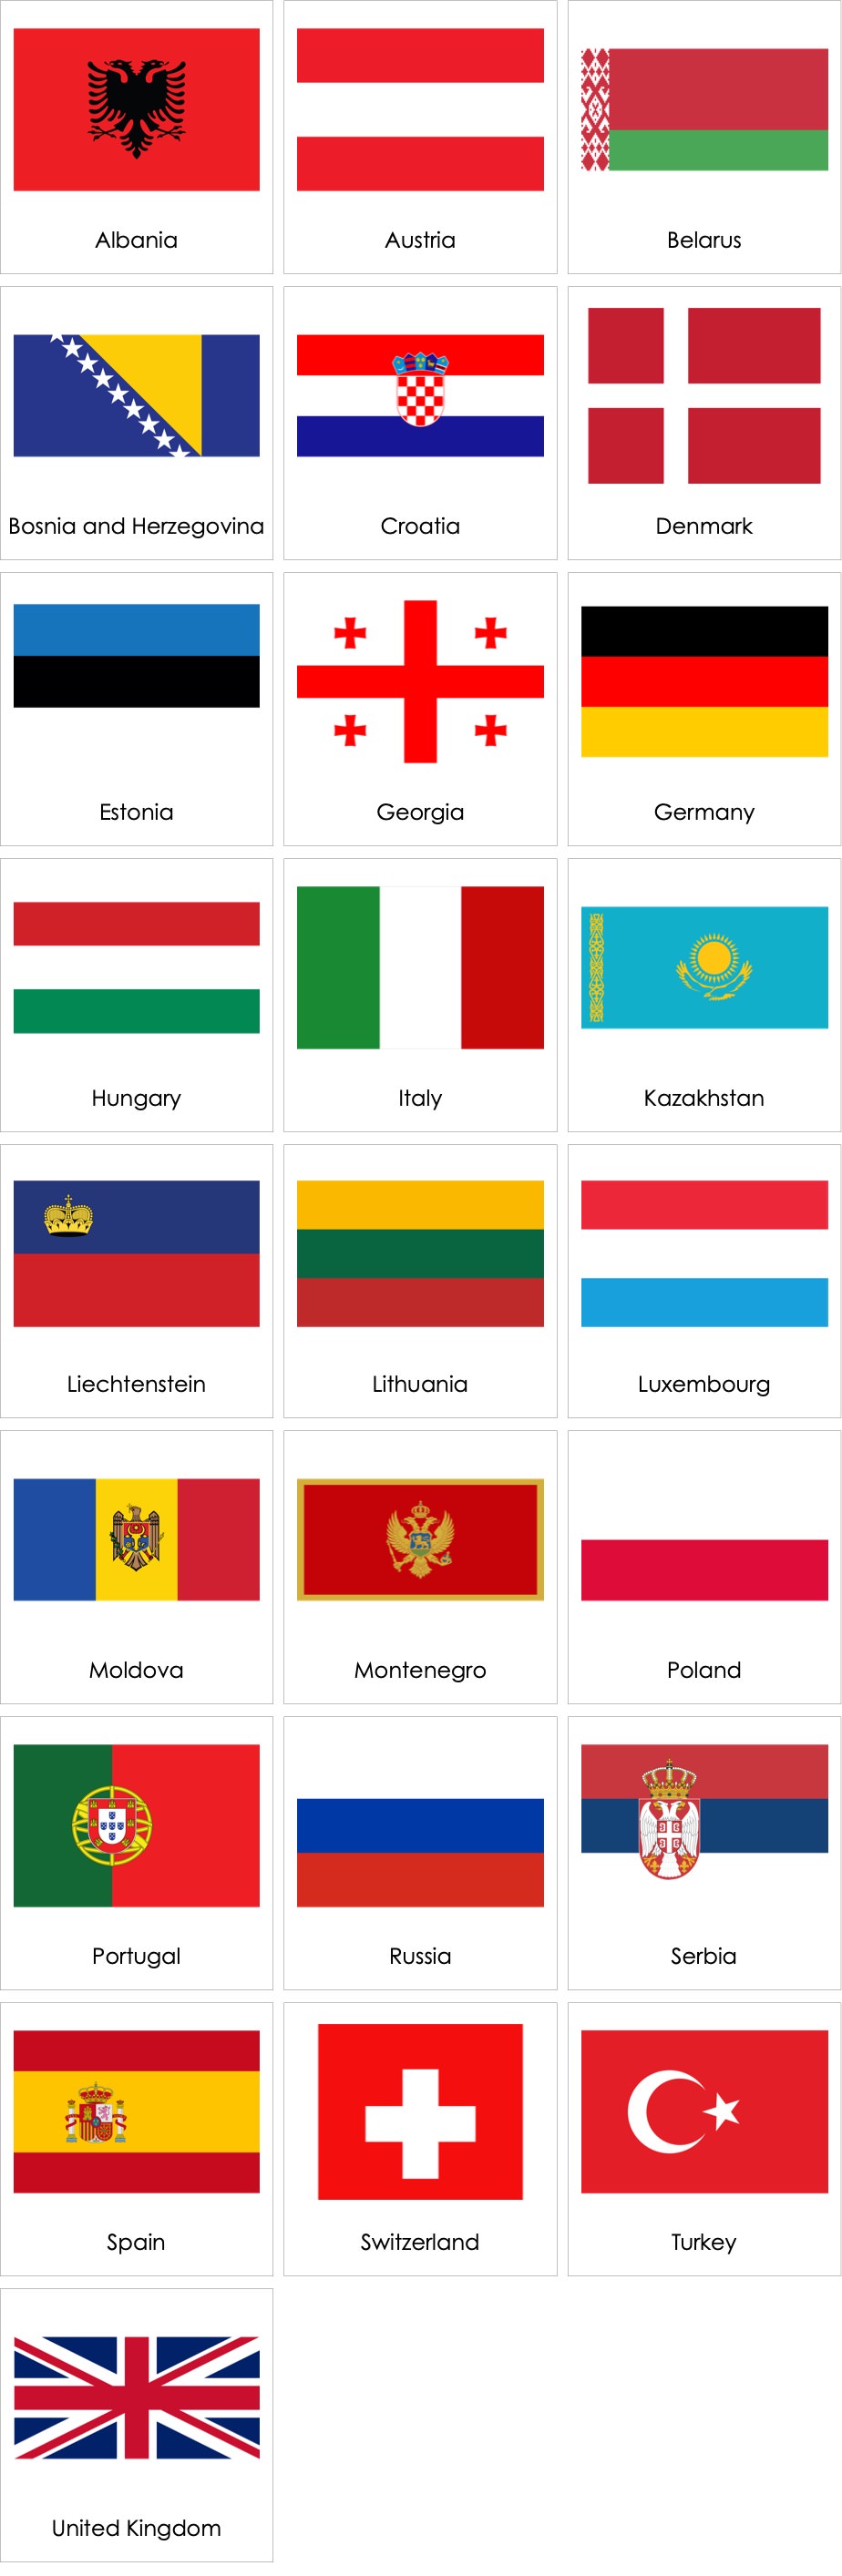 9-best-images-of-printable-flags-of-countries-printable-flags-of